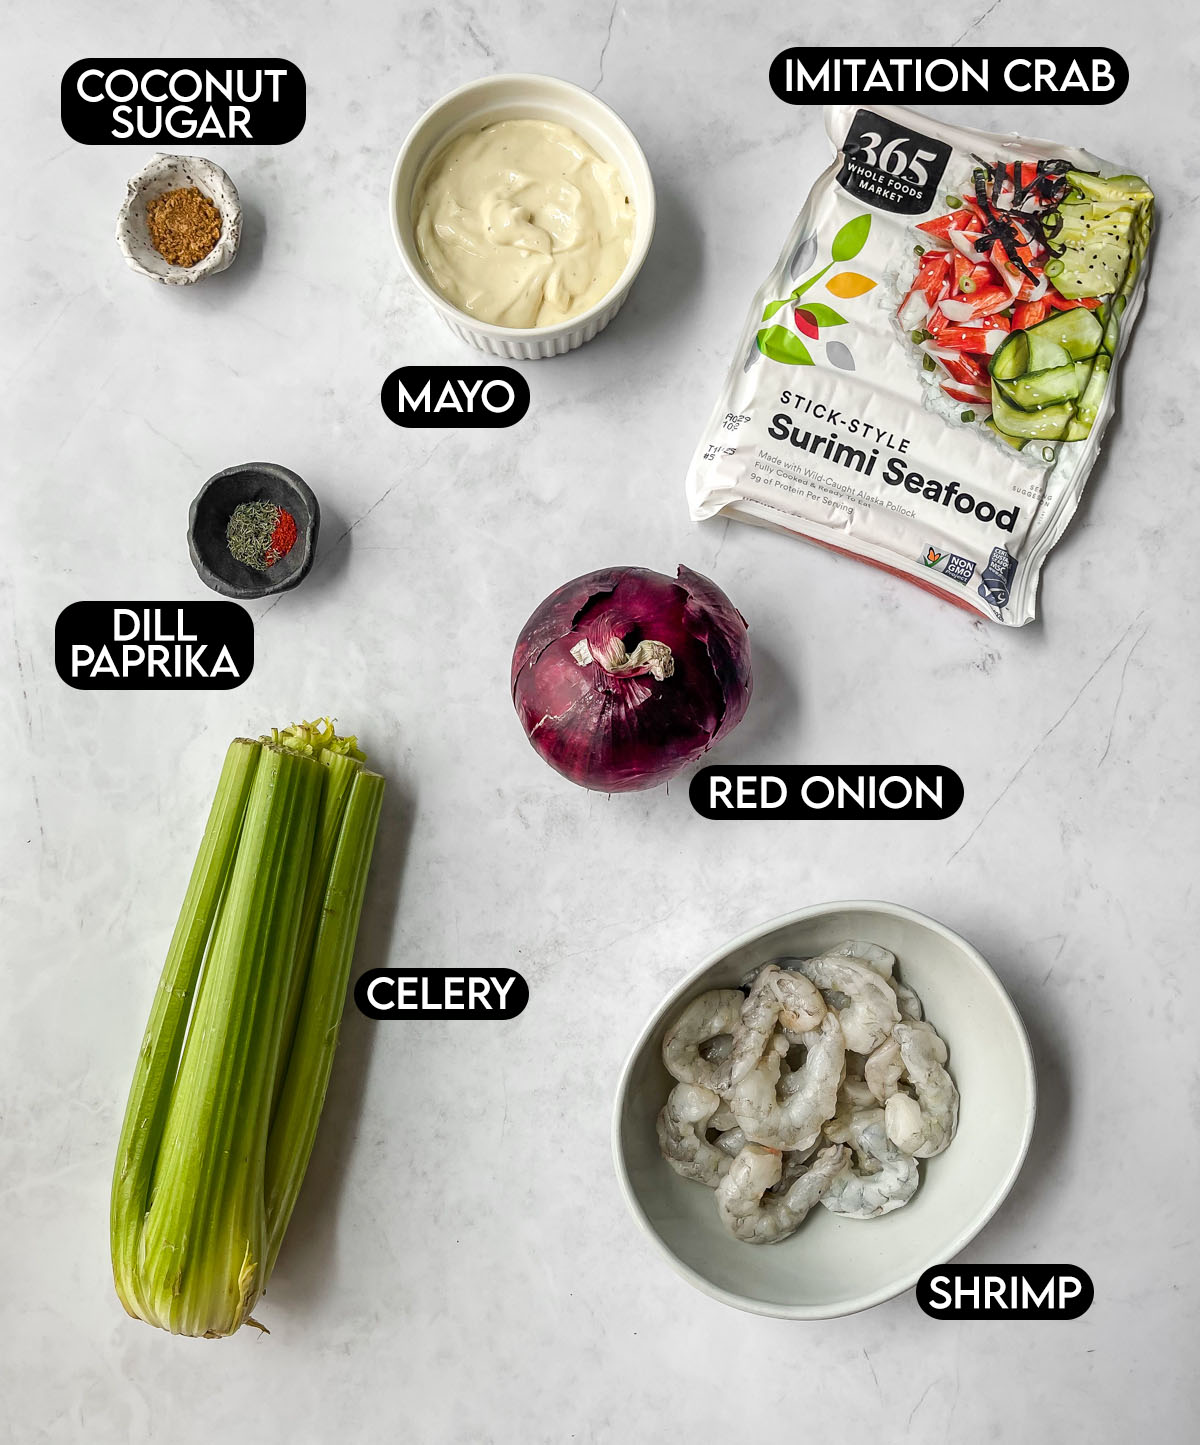 Labeled ingredients needed for seafood salad: coconut sugar, imitation crab, mayo, dill, paprika, red onion, celery, shrimp.